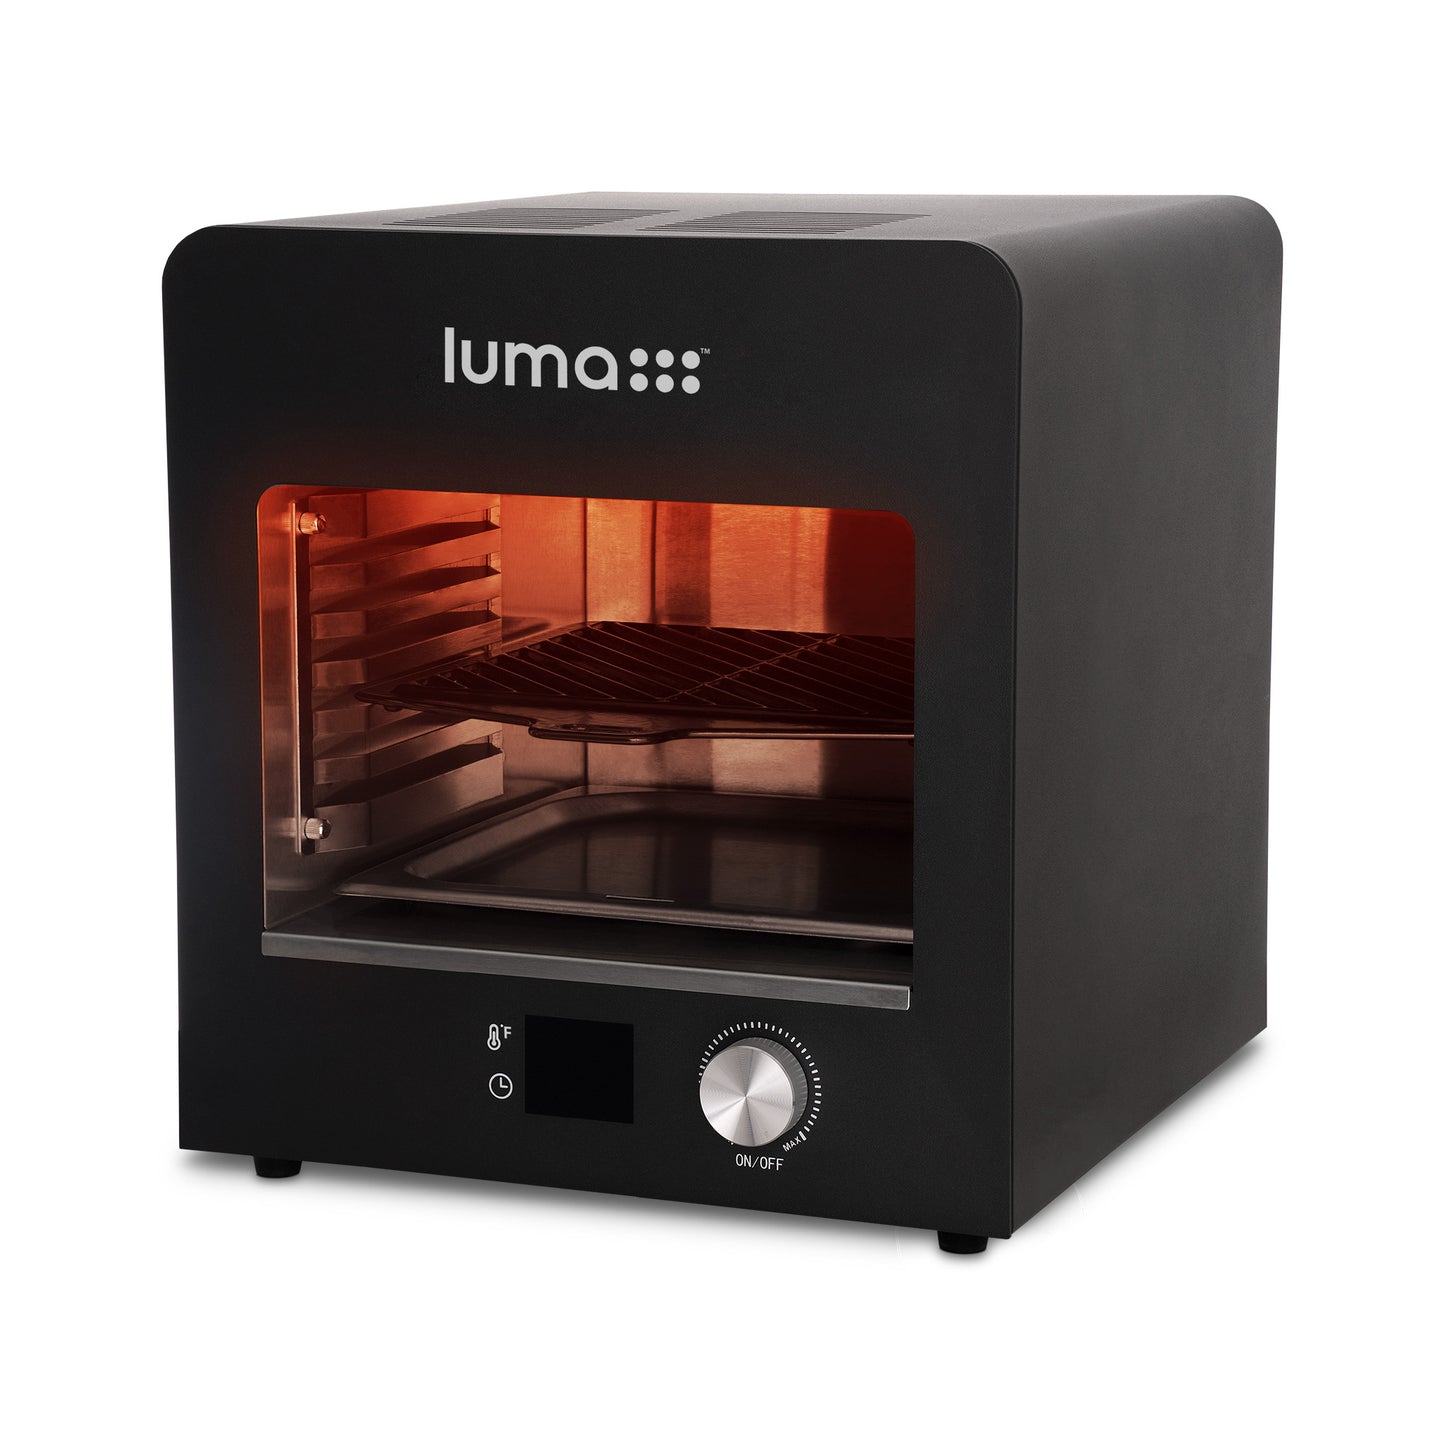 Luma Electric Steak Grill, Portable Indoor Countertop Oven with Griddle, Smokeless Electric Infrared Grill, Heats up to 1450 Degrees, BBQ, Grill, Toast, and Broil Chicken, Beef, Pork, and Vegetables, Cook Steak Meat in Minutes